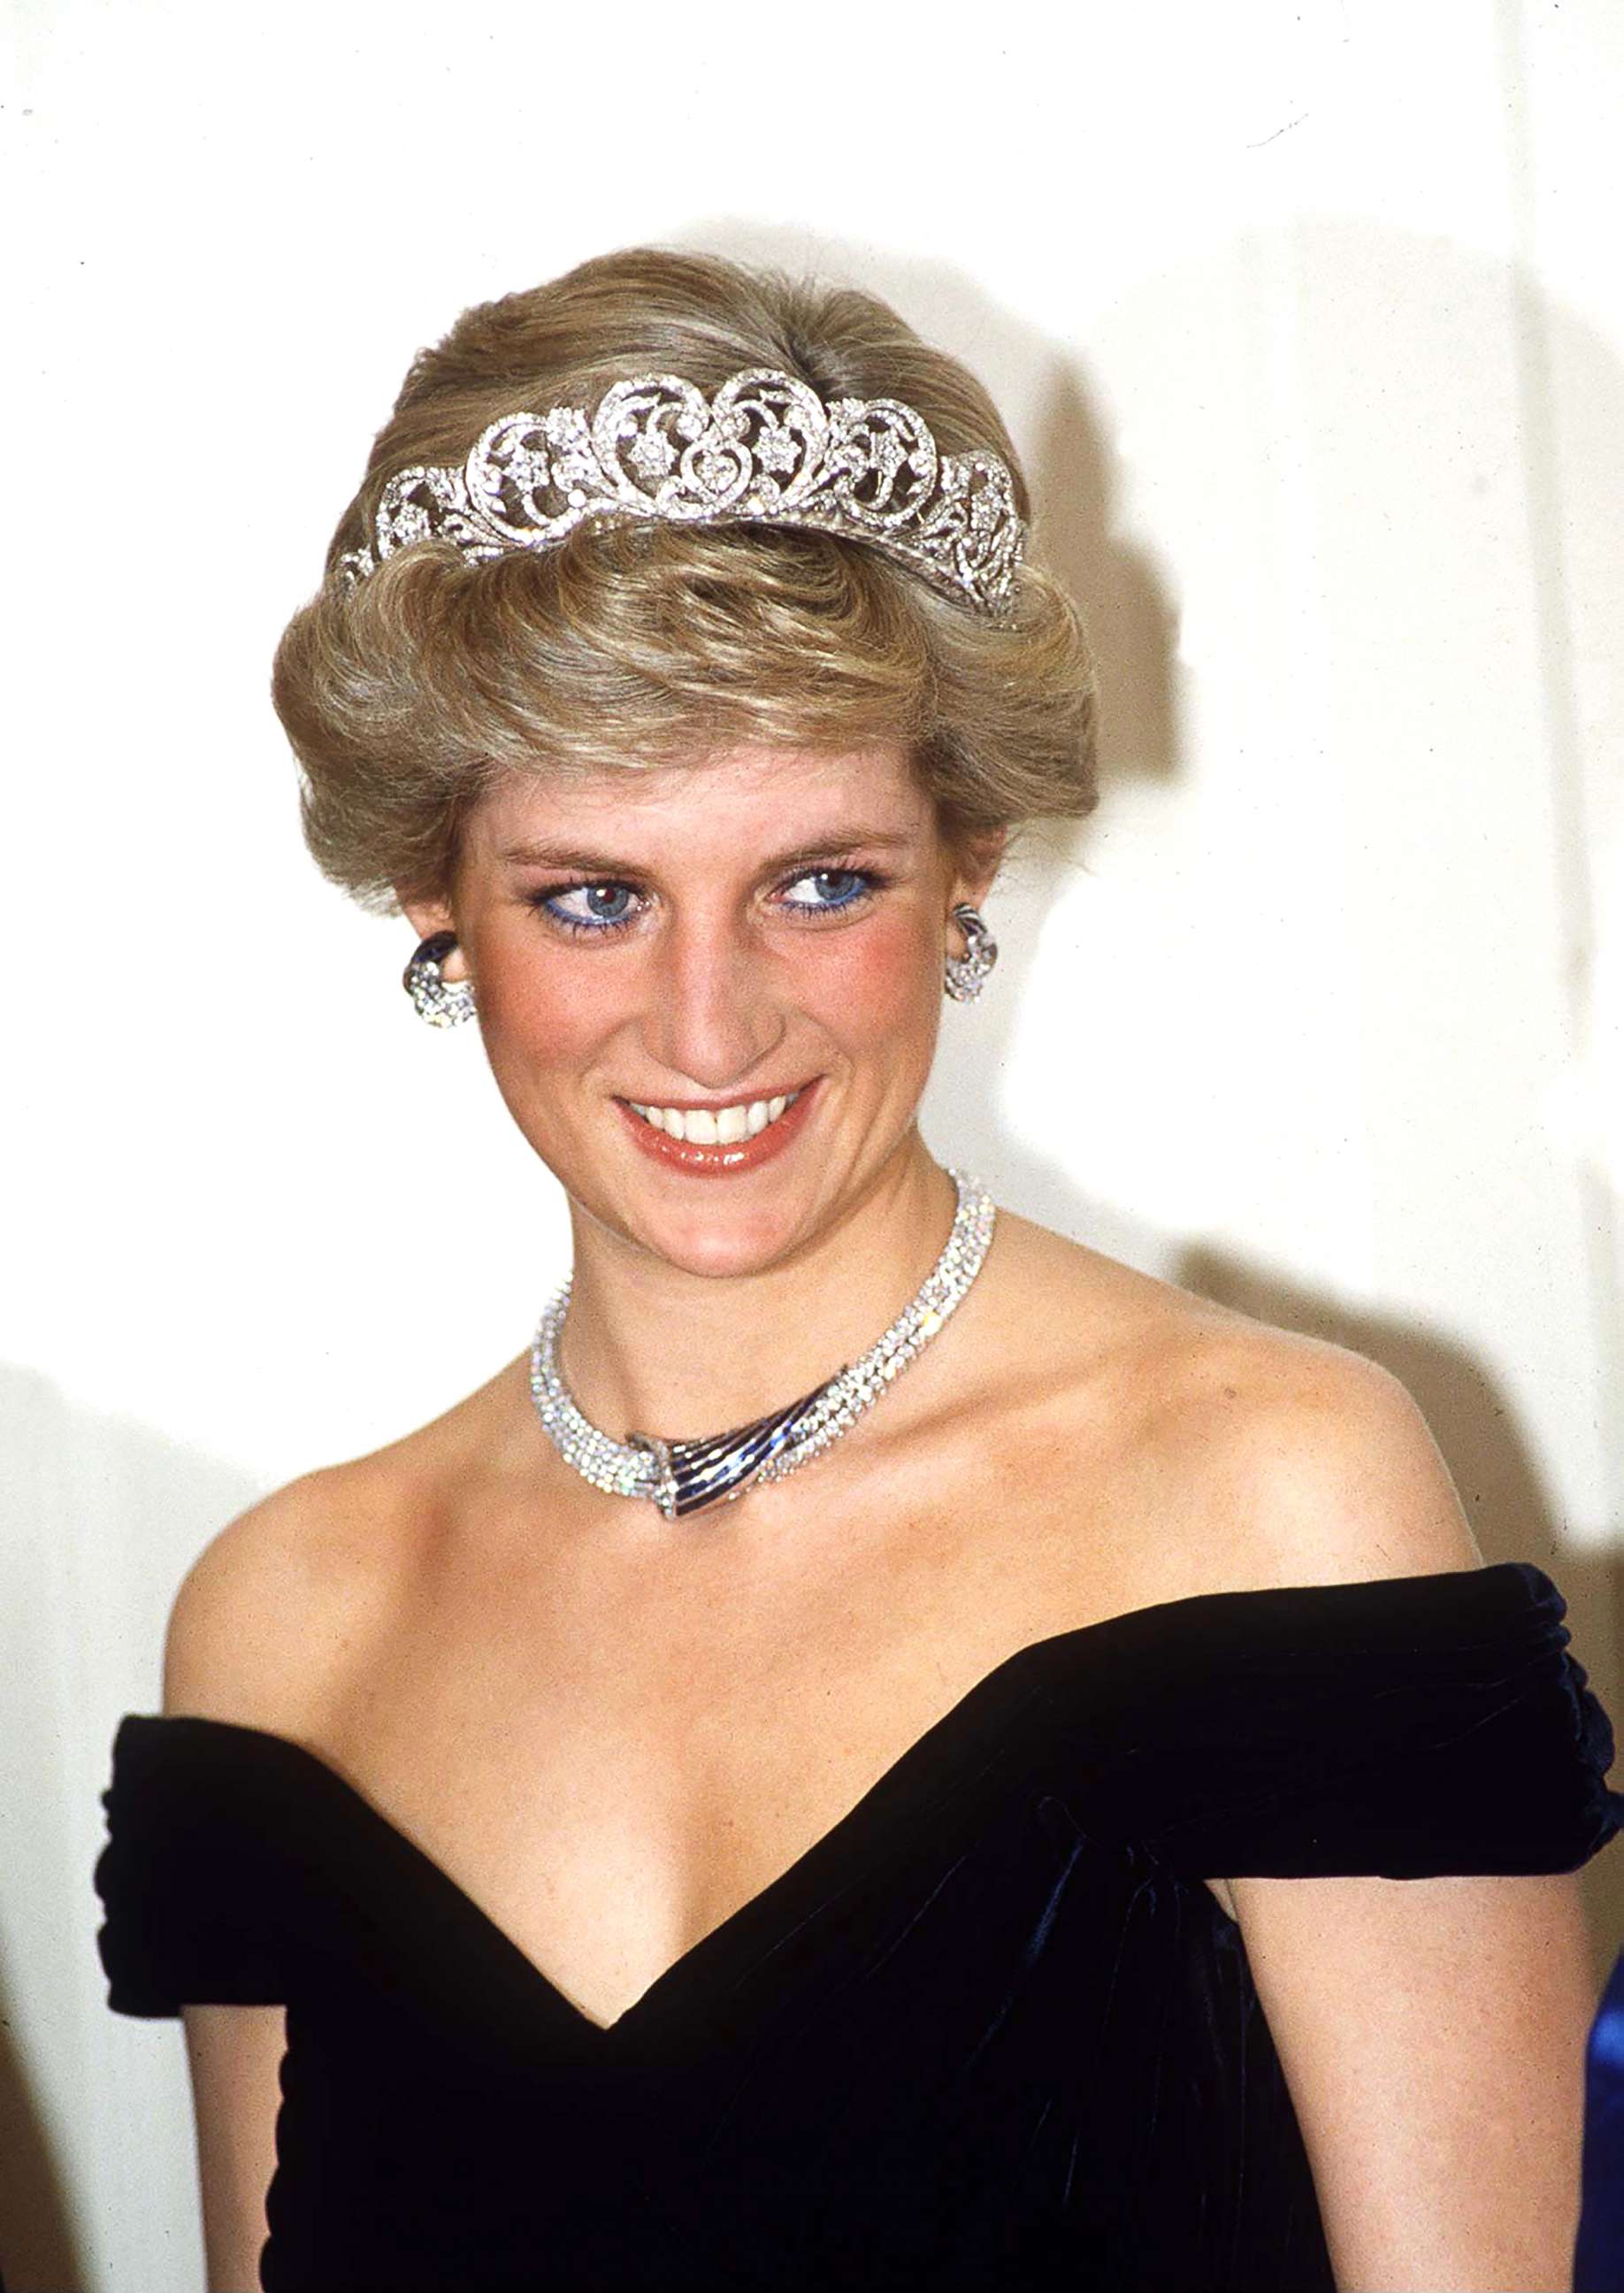 PHOTO: Princess Diana poses in Bonn, Germany, wearing sapphire and diamond jewels which were a gift from the Sultan of Oman (the Tiara is her own) with a dress designed by Victor Edelstein. 